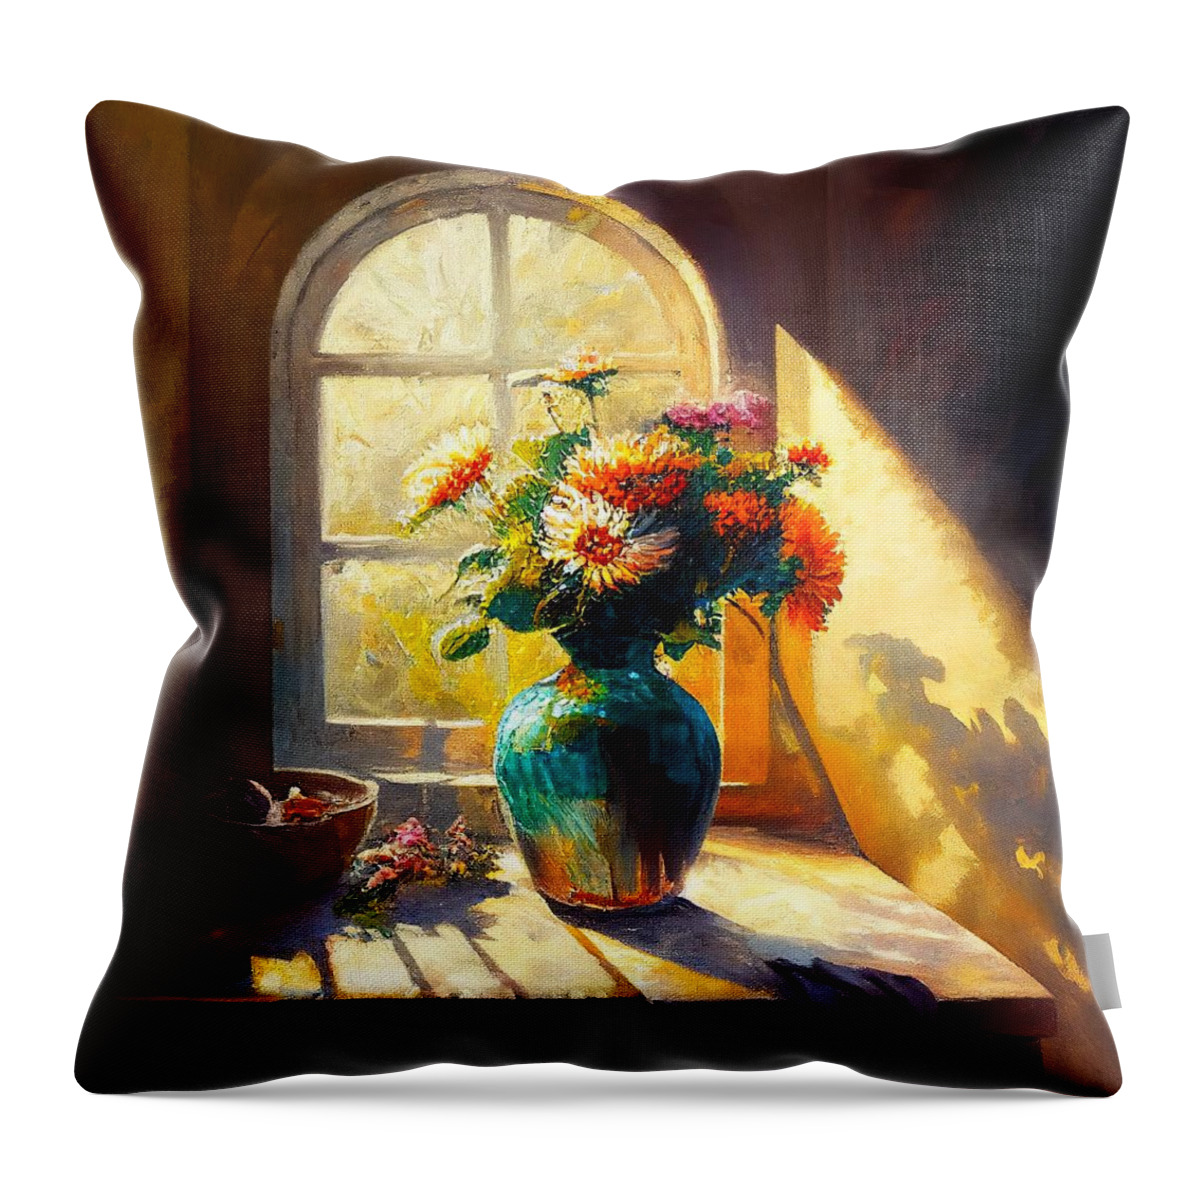 Vase Throw Pillow featuring the painting Vase of Flowers No.3 by My Head Cinema